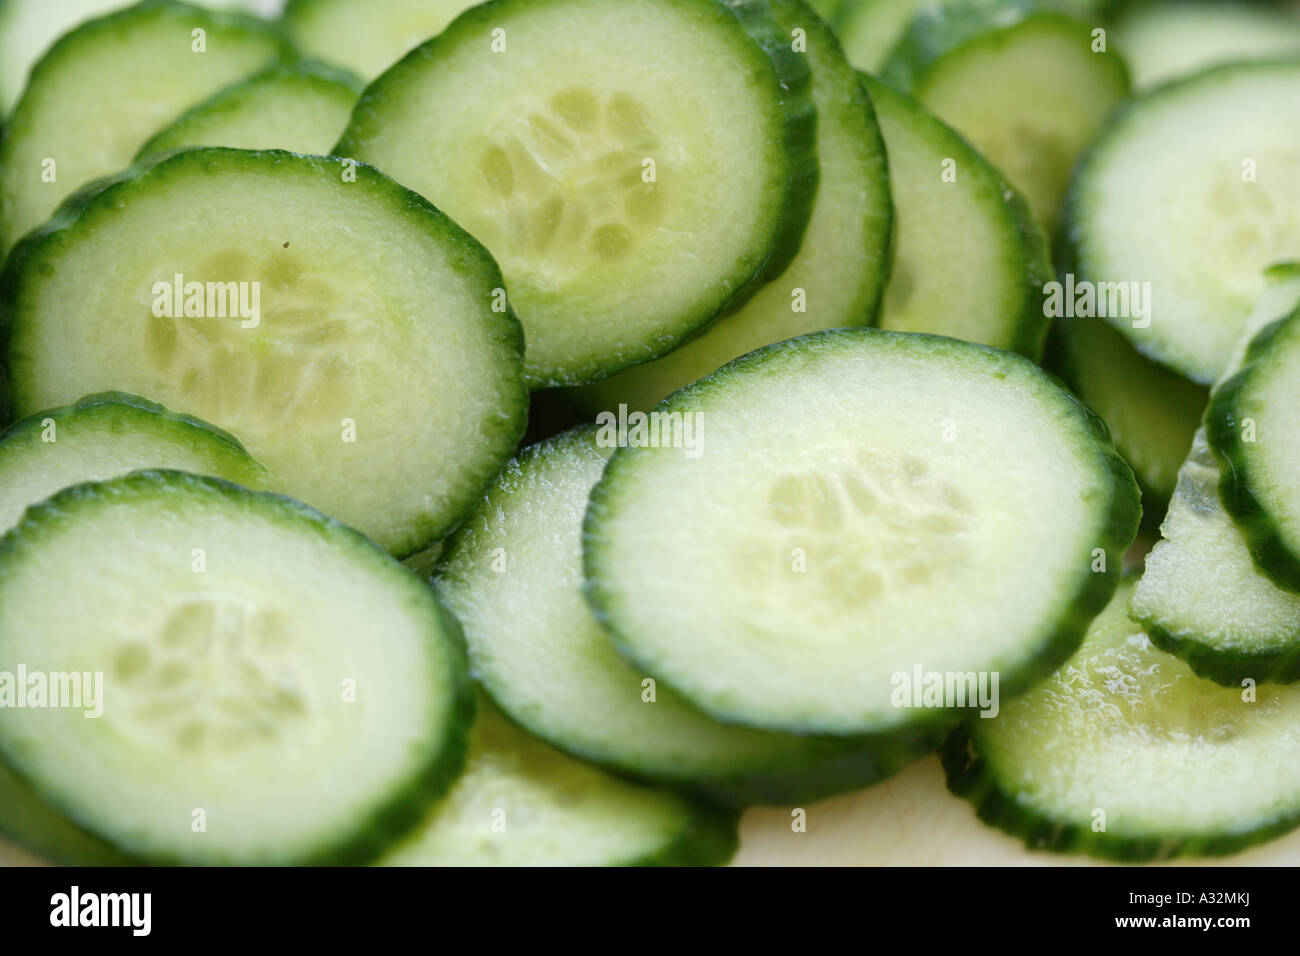 Cucumber in plates Stock Photo